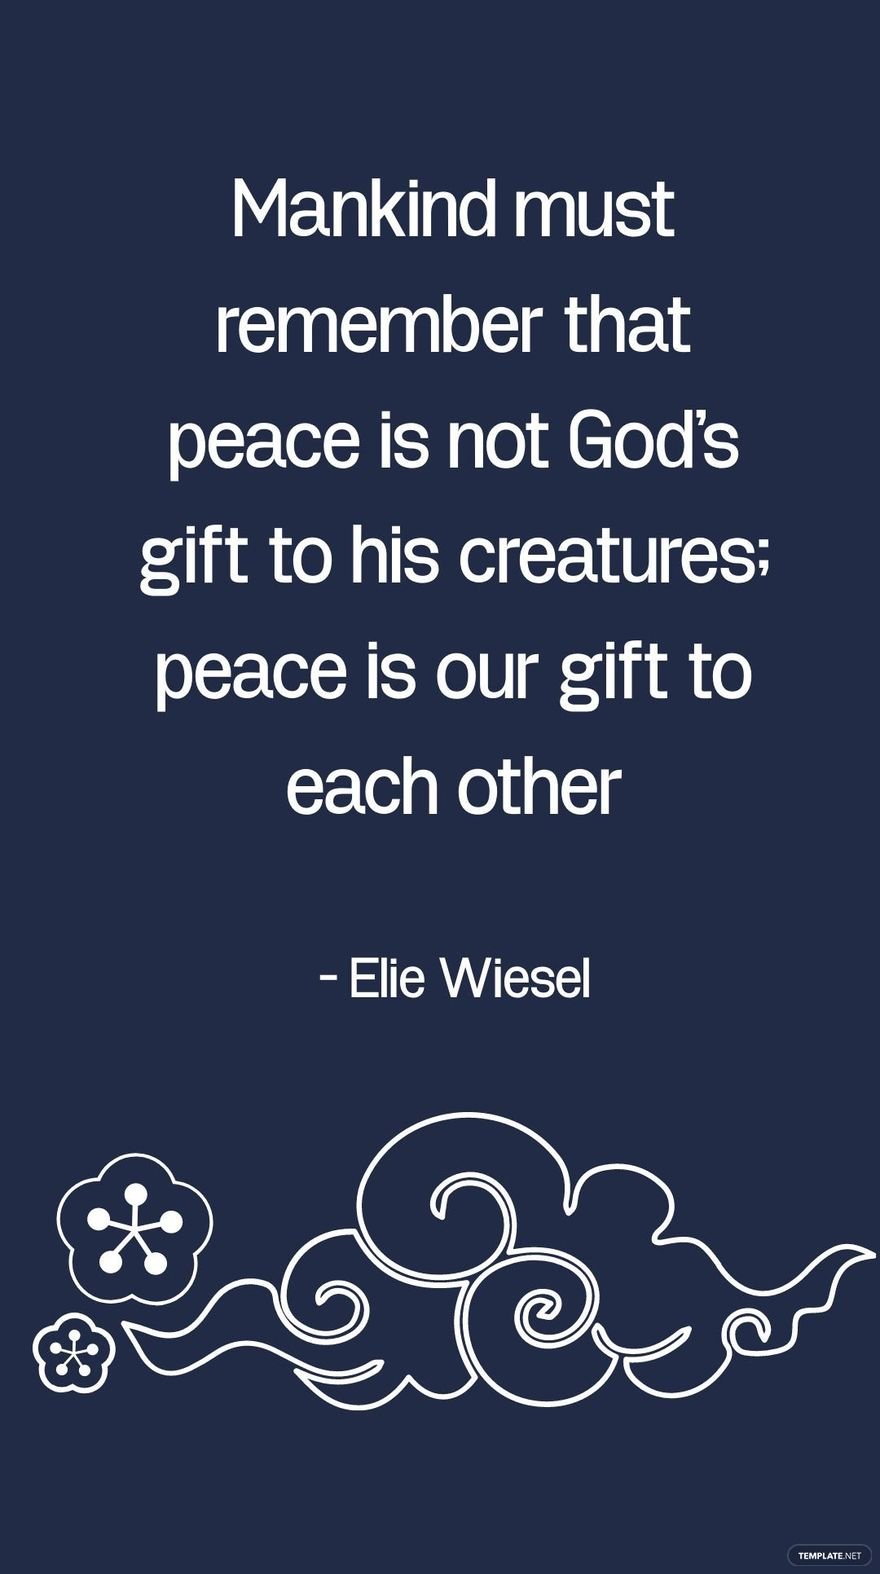 Elie Wiesel - Mankind must remember that peace is not God's gift to his creatures; peace is our gift to each other